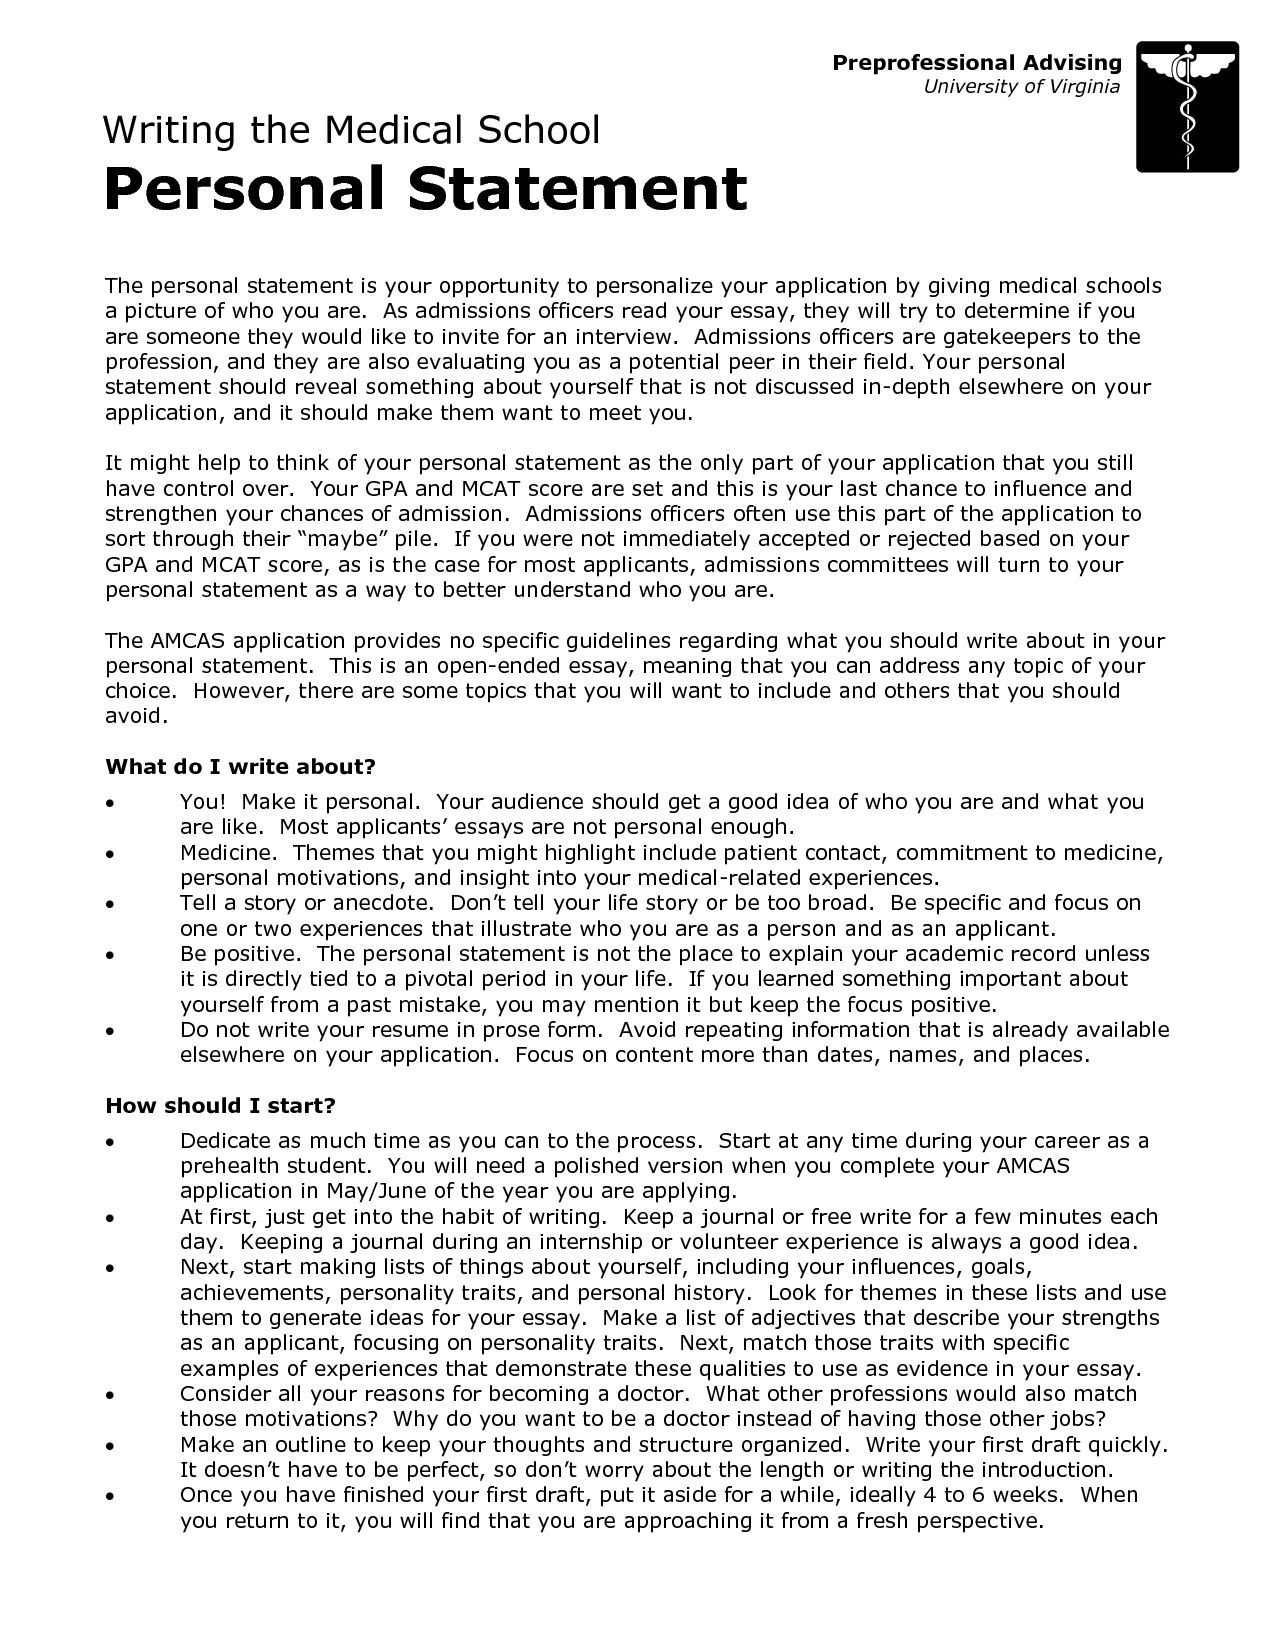 A personal statement for an application